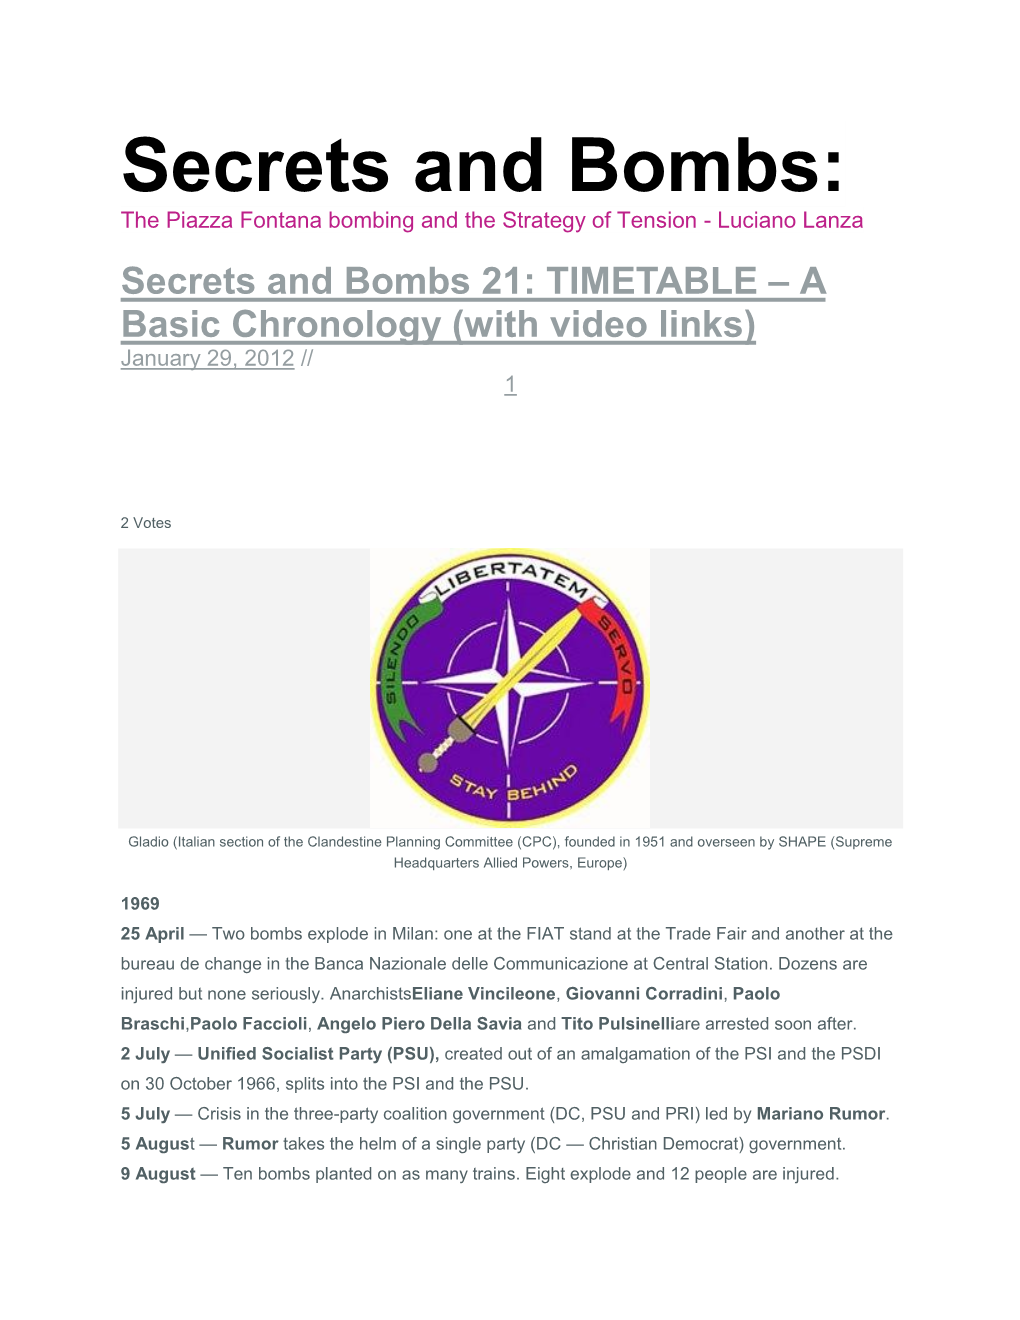 Secrets and Bombs: the Piazza Fontana Bombing and the Strategy of Tension - Luciano Lanza